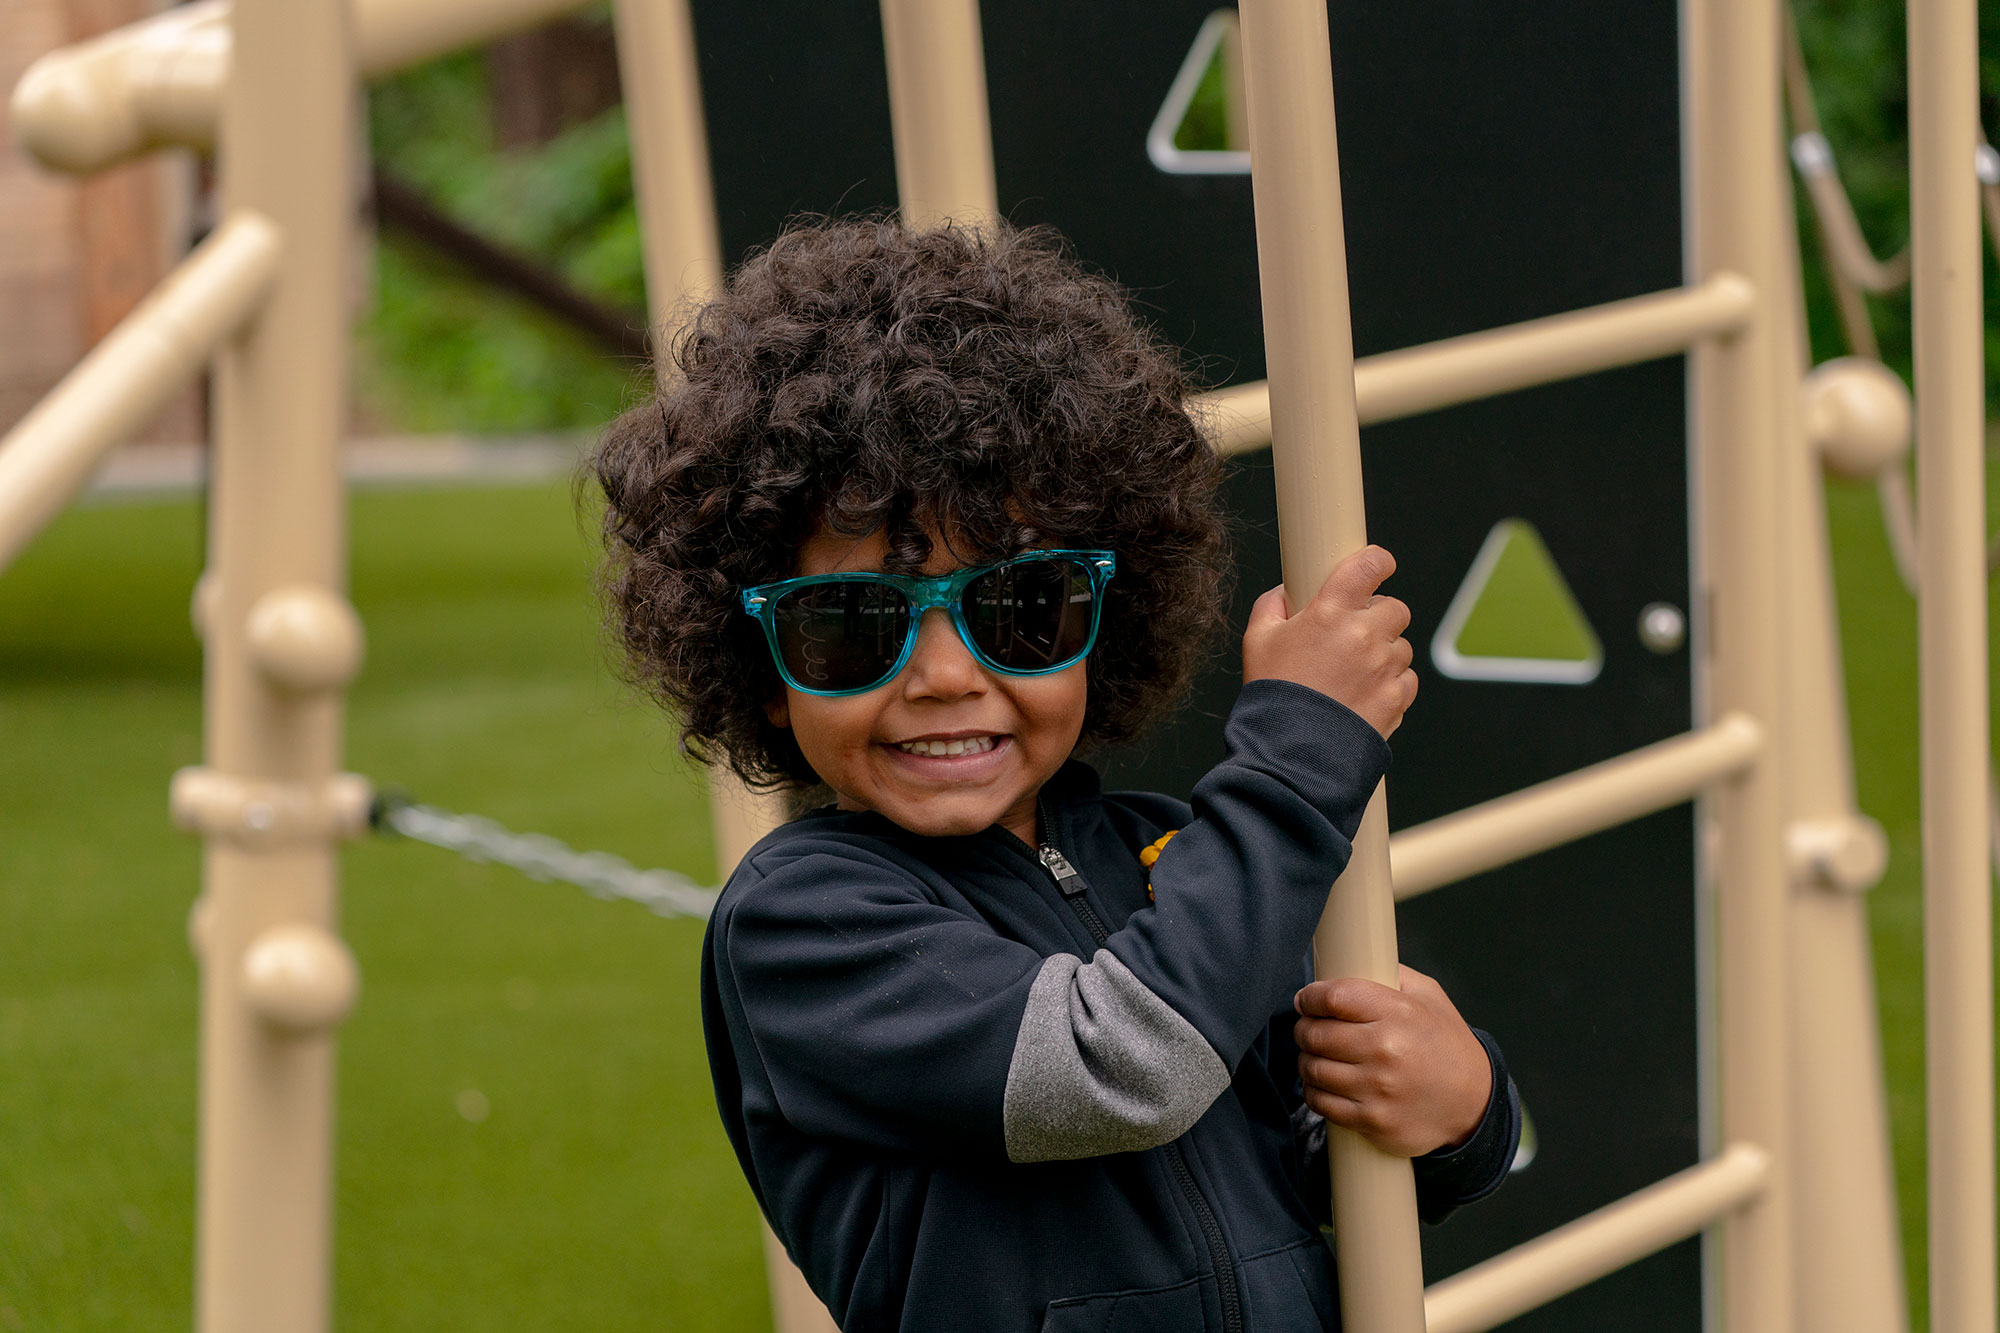 A young boy wearing sunglasses on a playground.